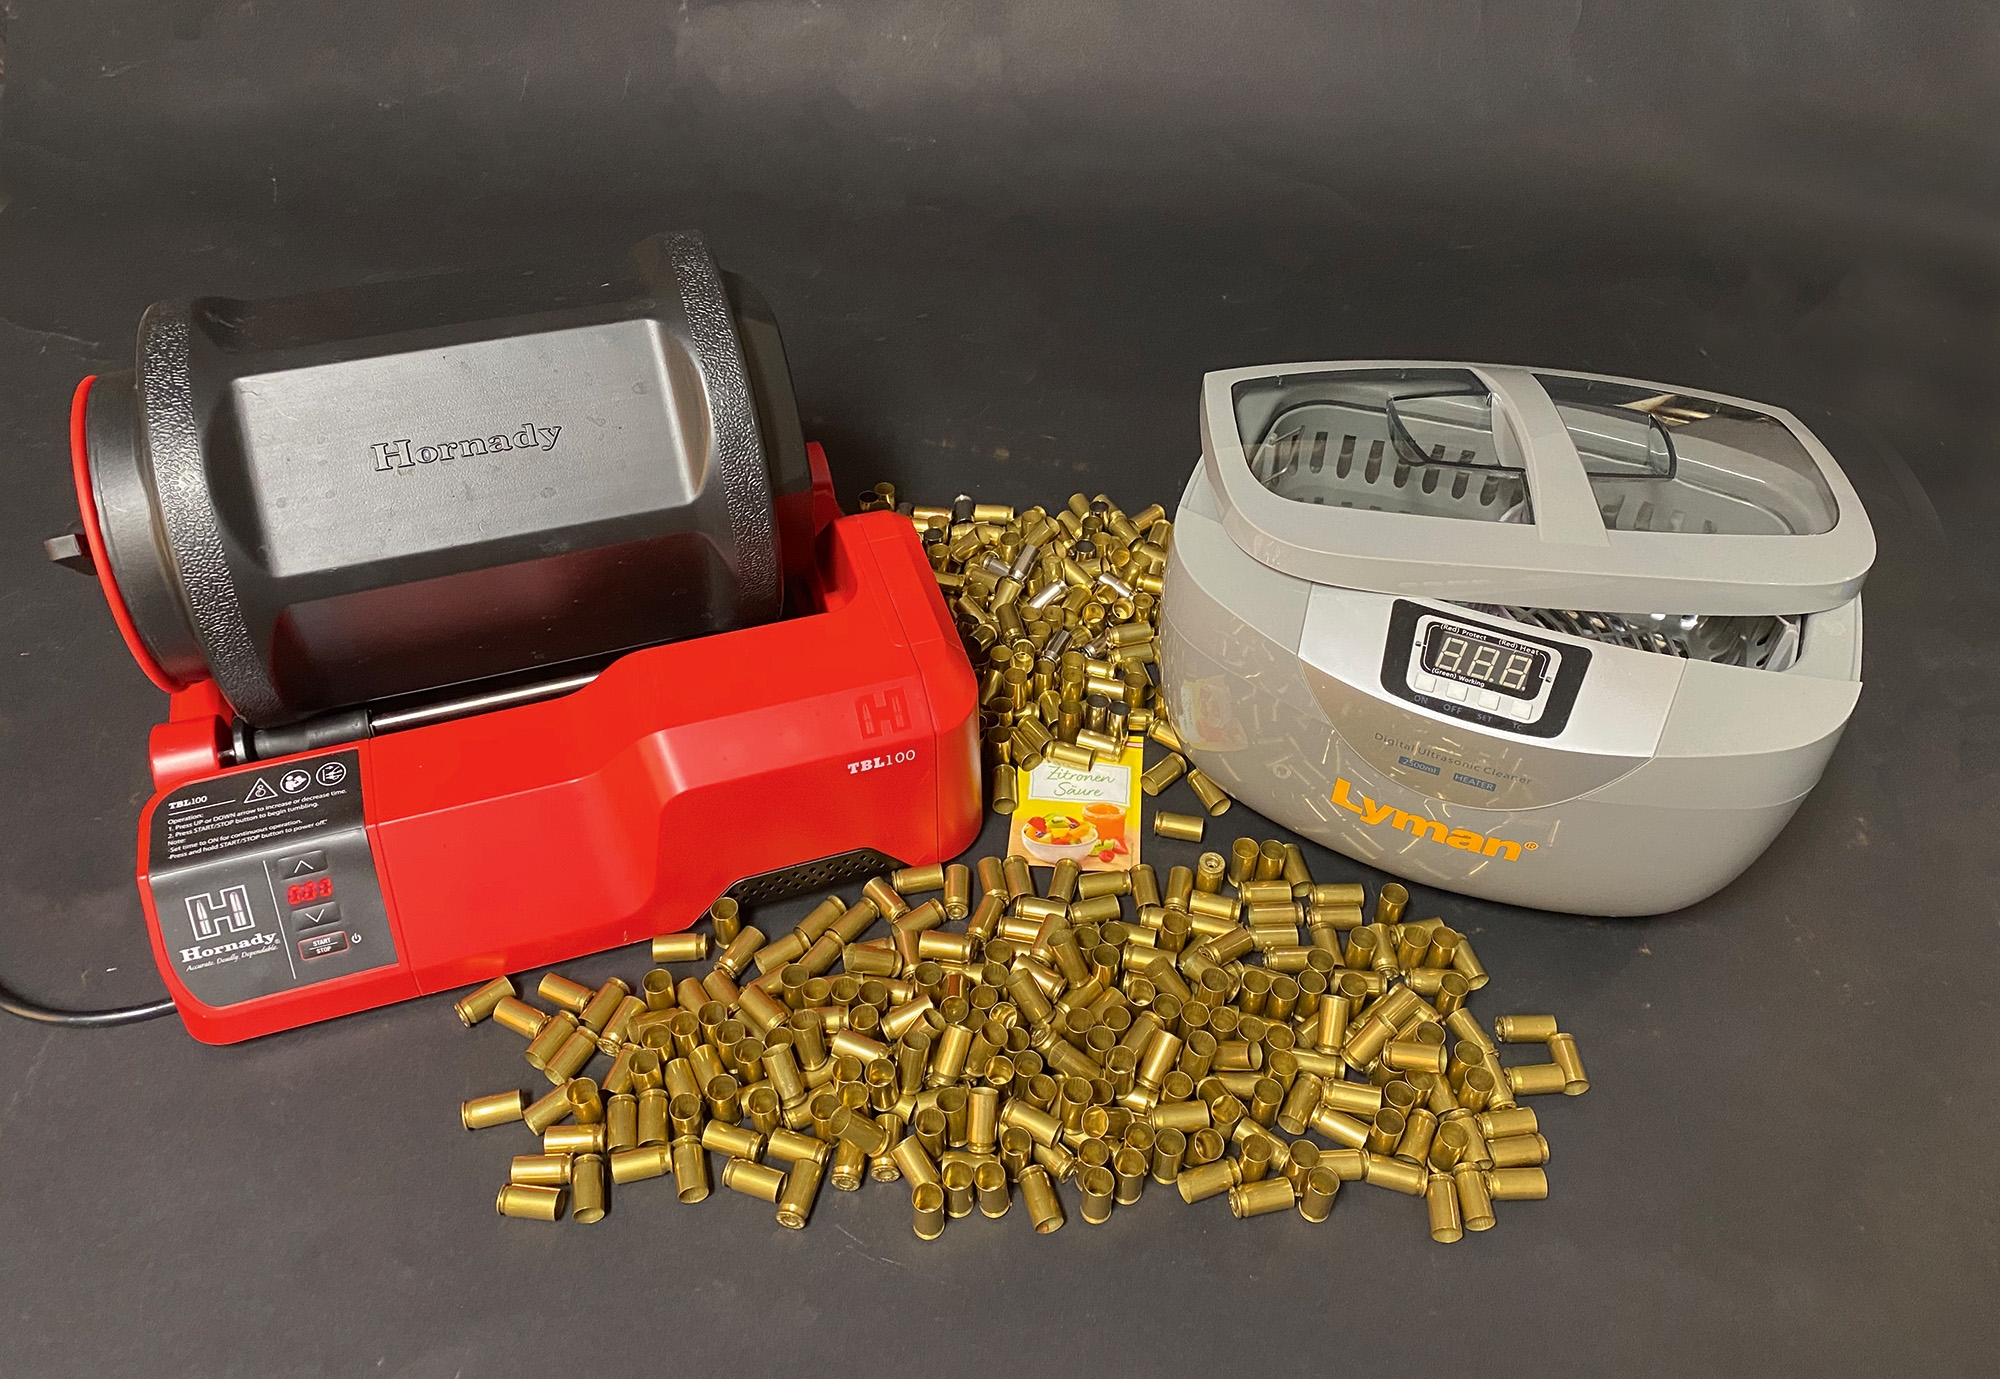 Reloading: Using a Tumbler to Clean Brass Cartridge Cases